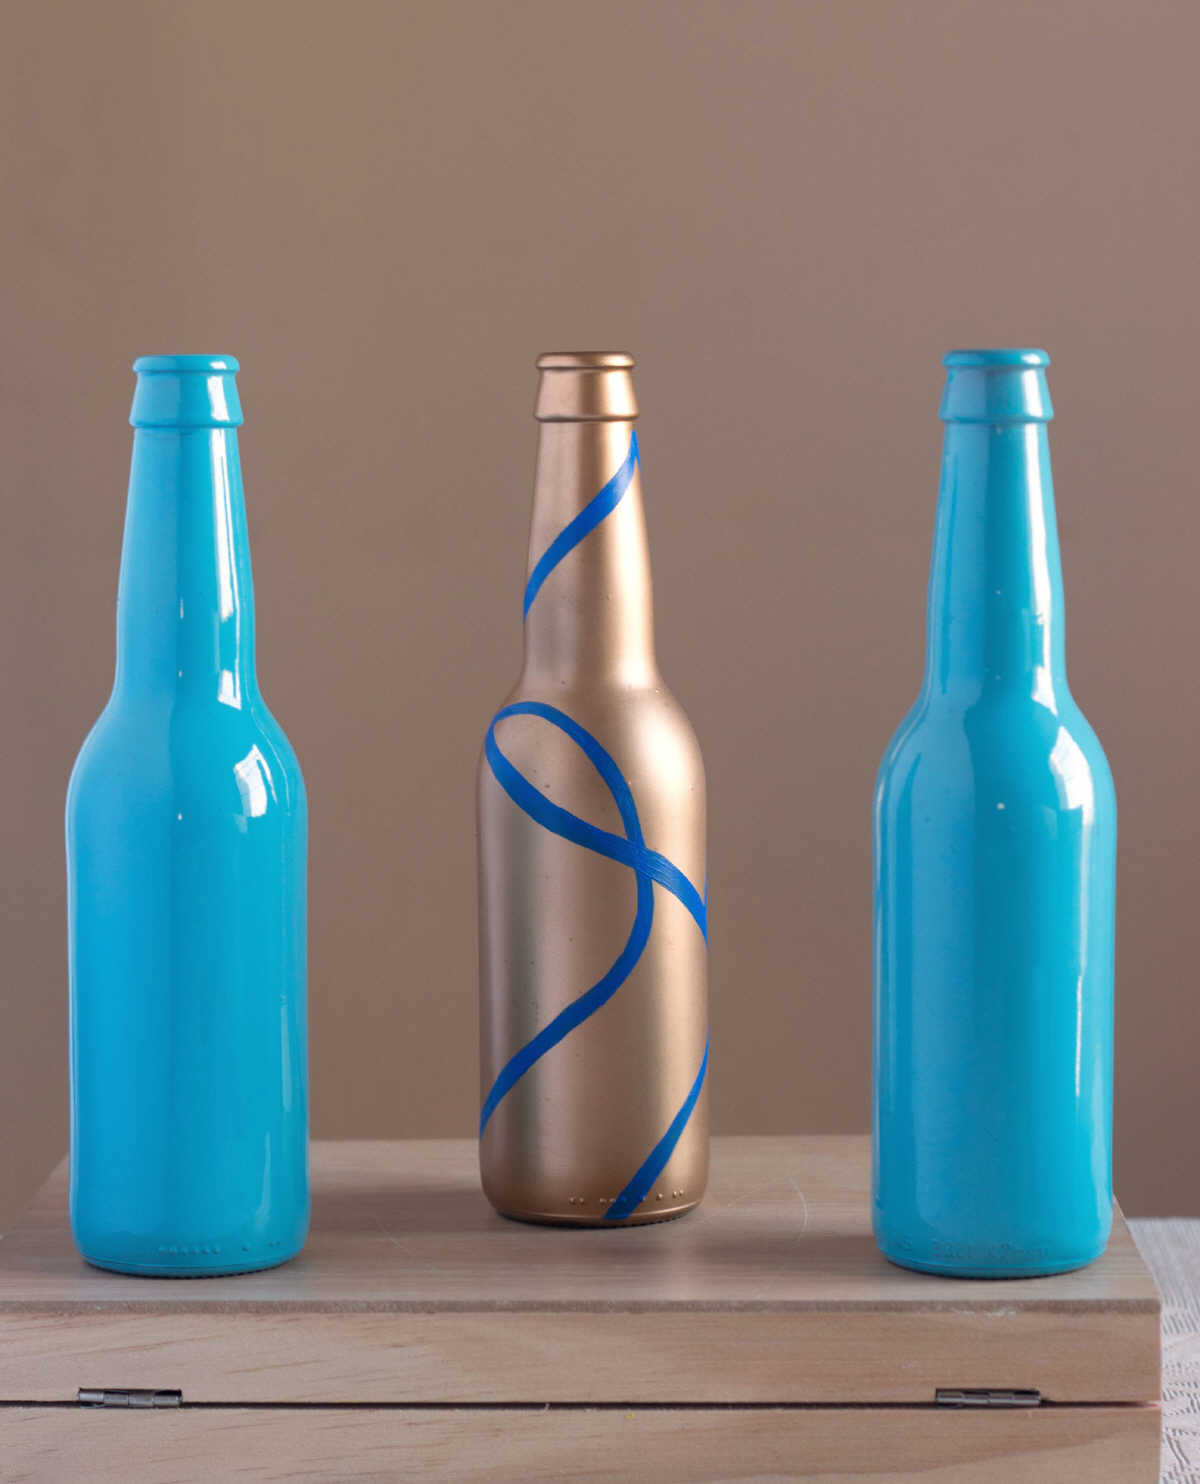 Hand Painted Glass Bottle Vases - Blue and Gold | imagicArt